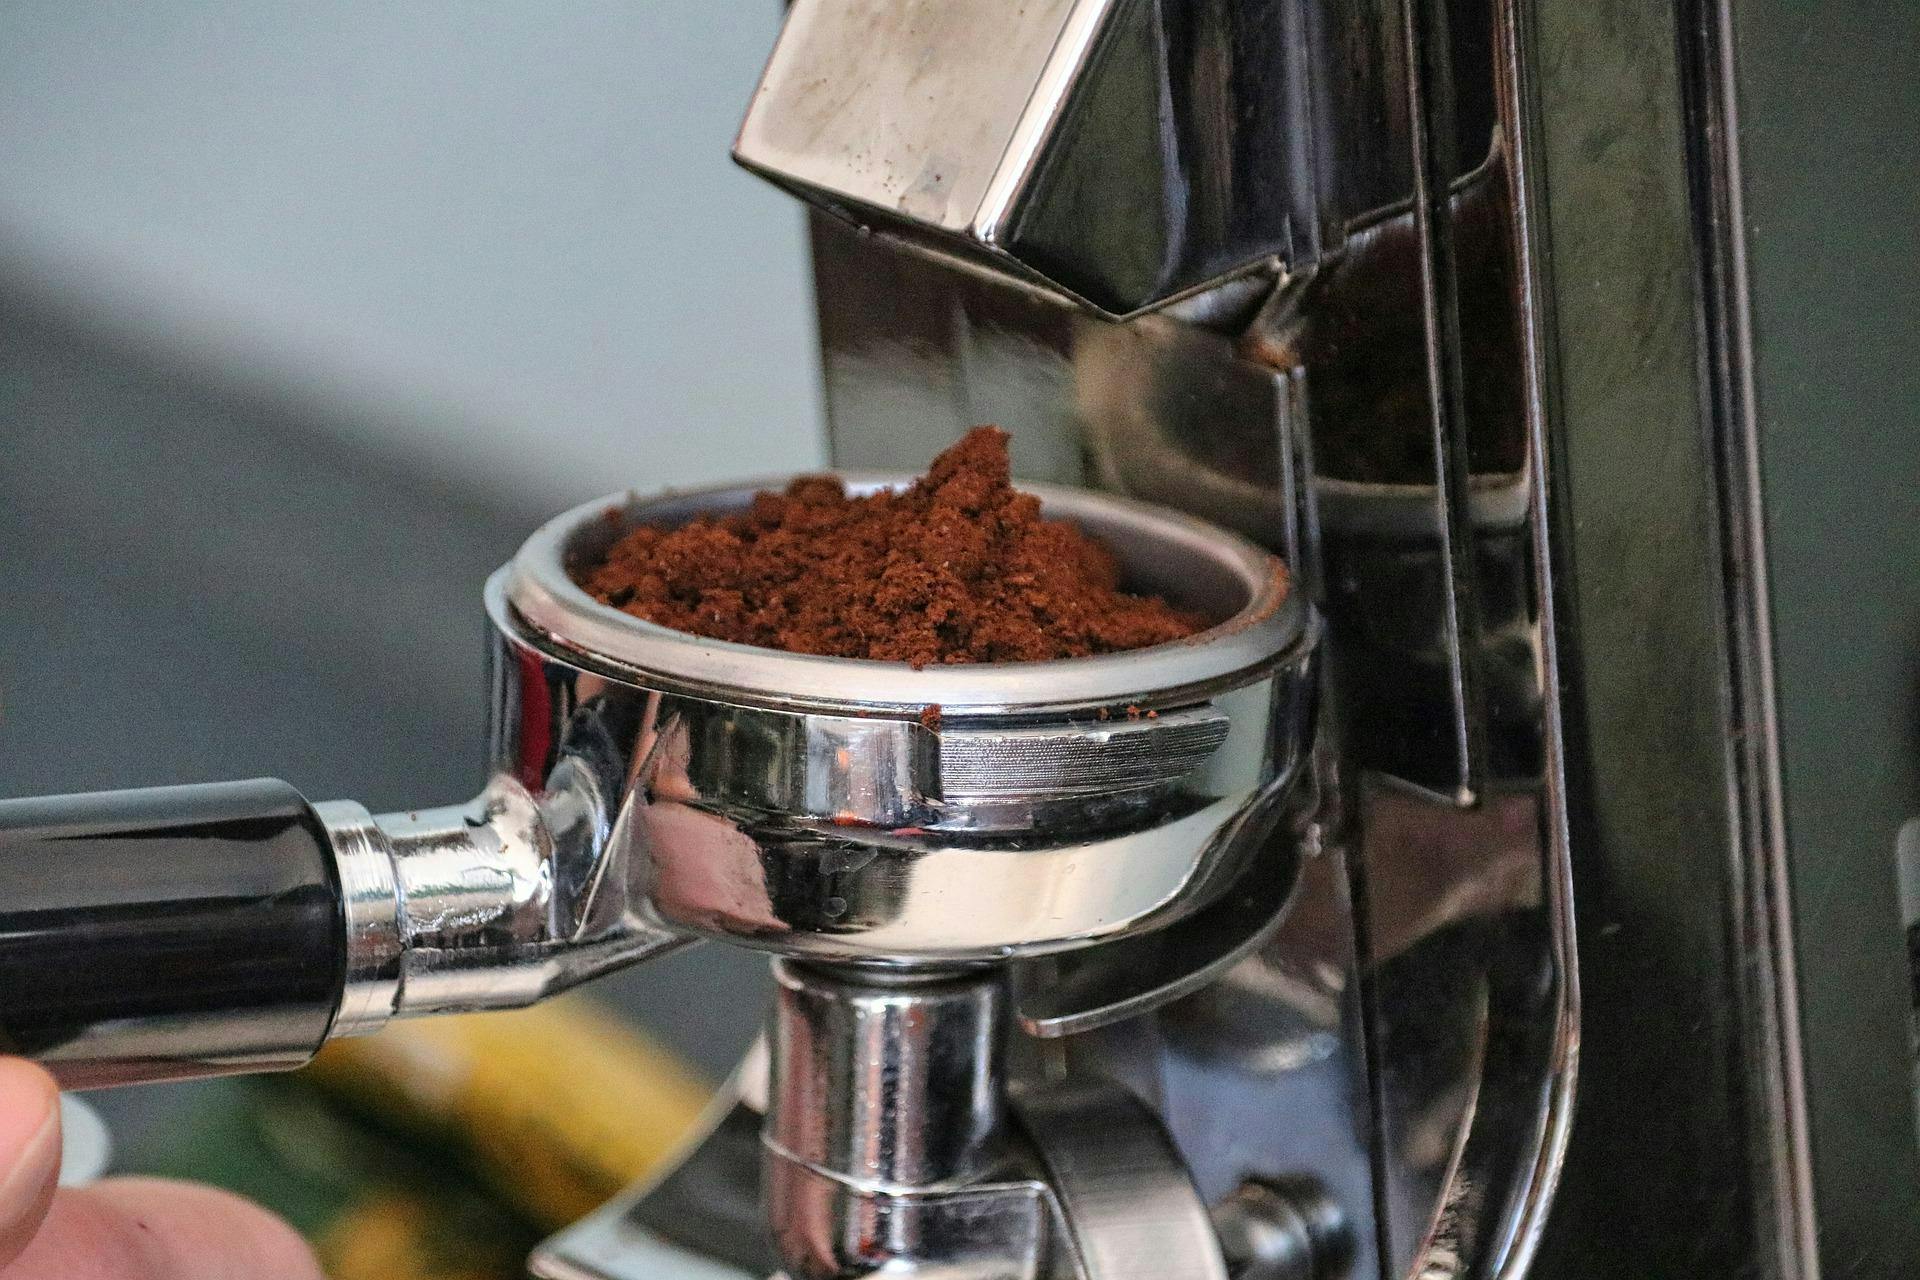 Someone collects ground coffee into an espresso portafilter.